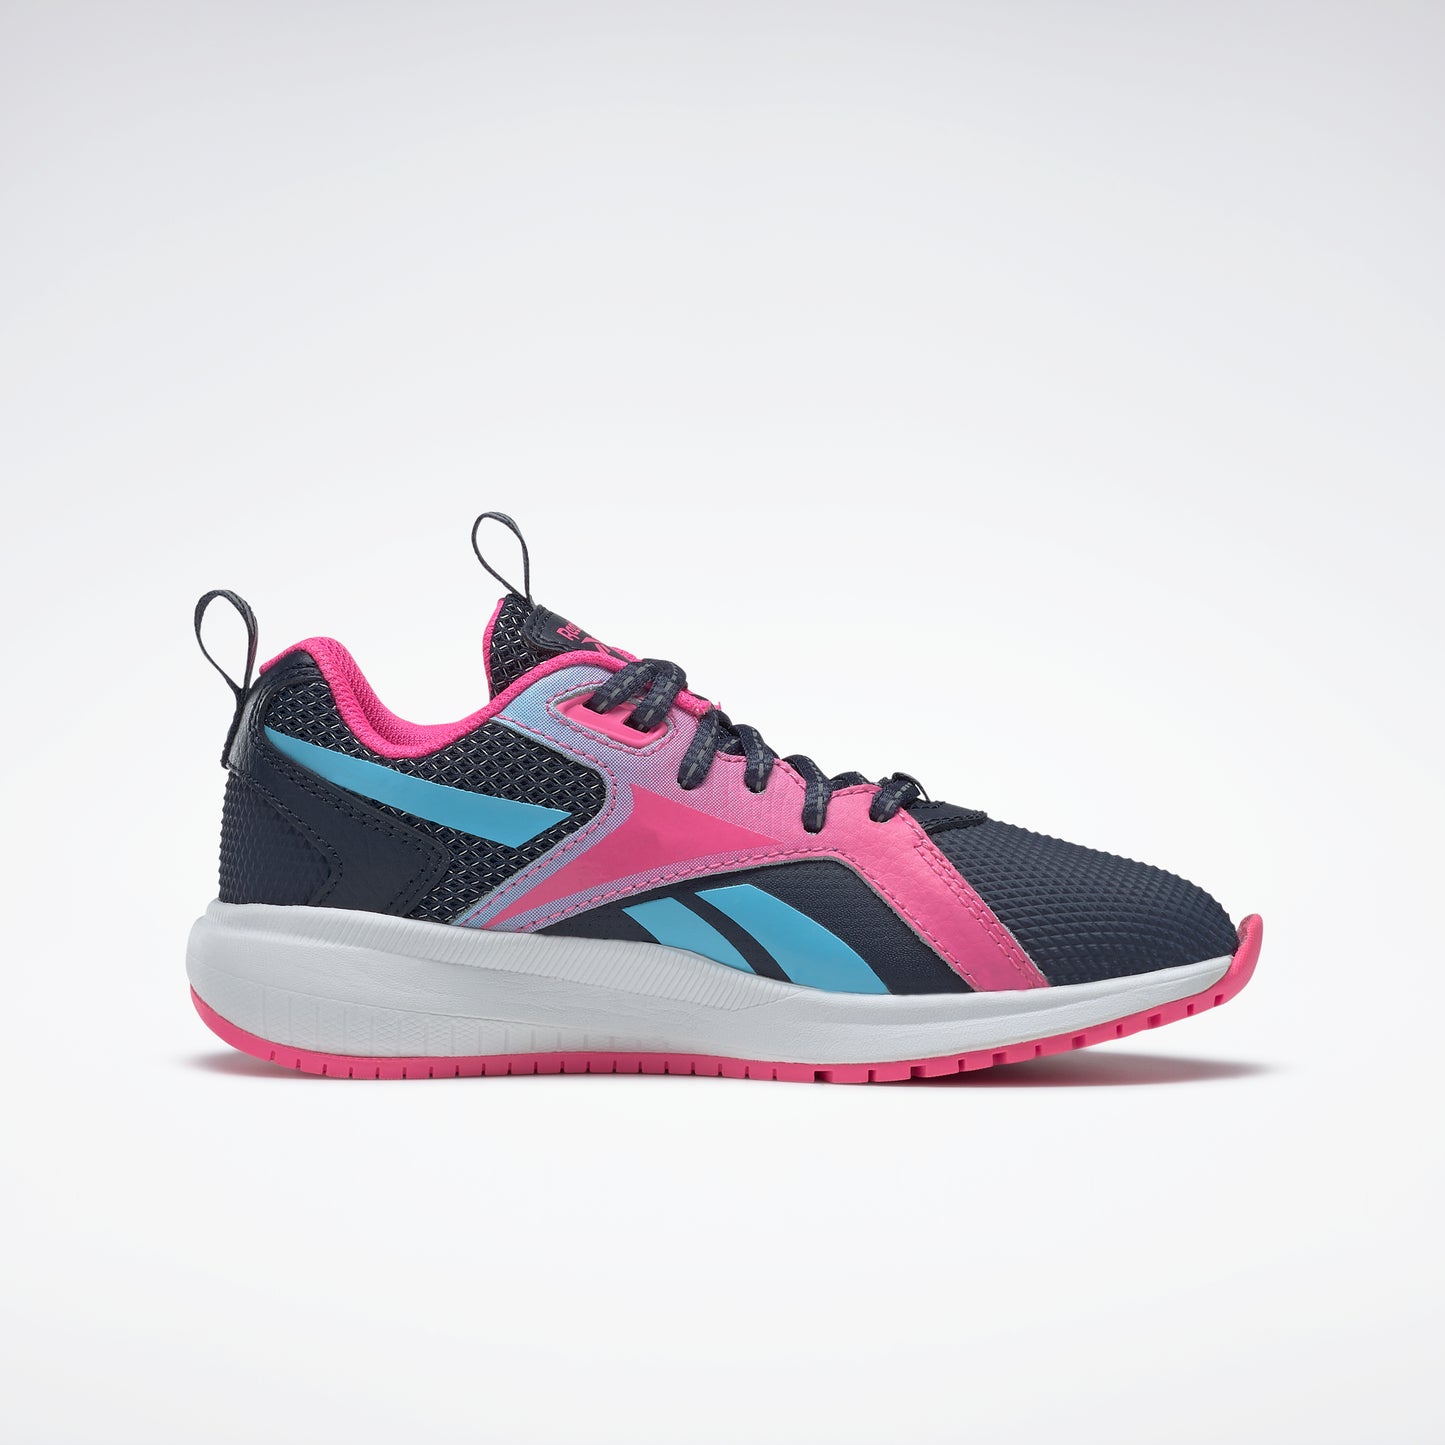 You Can Get Up To 70% Off Reebok Canada Shoes This Month